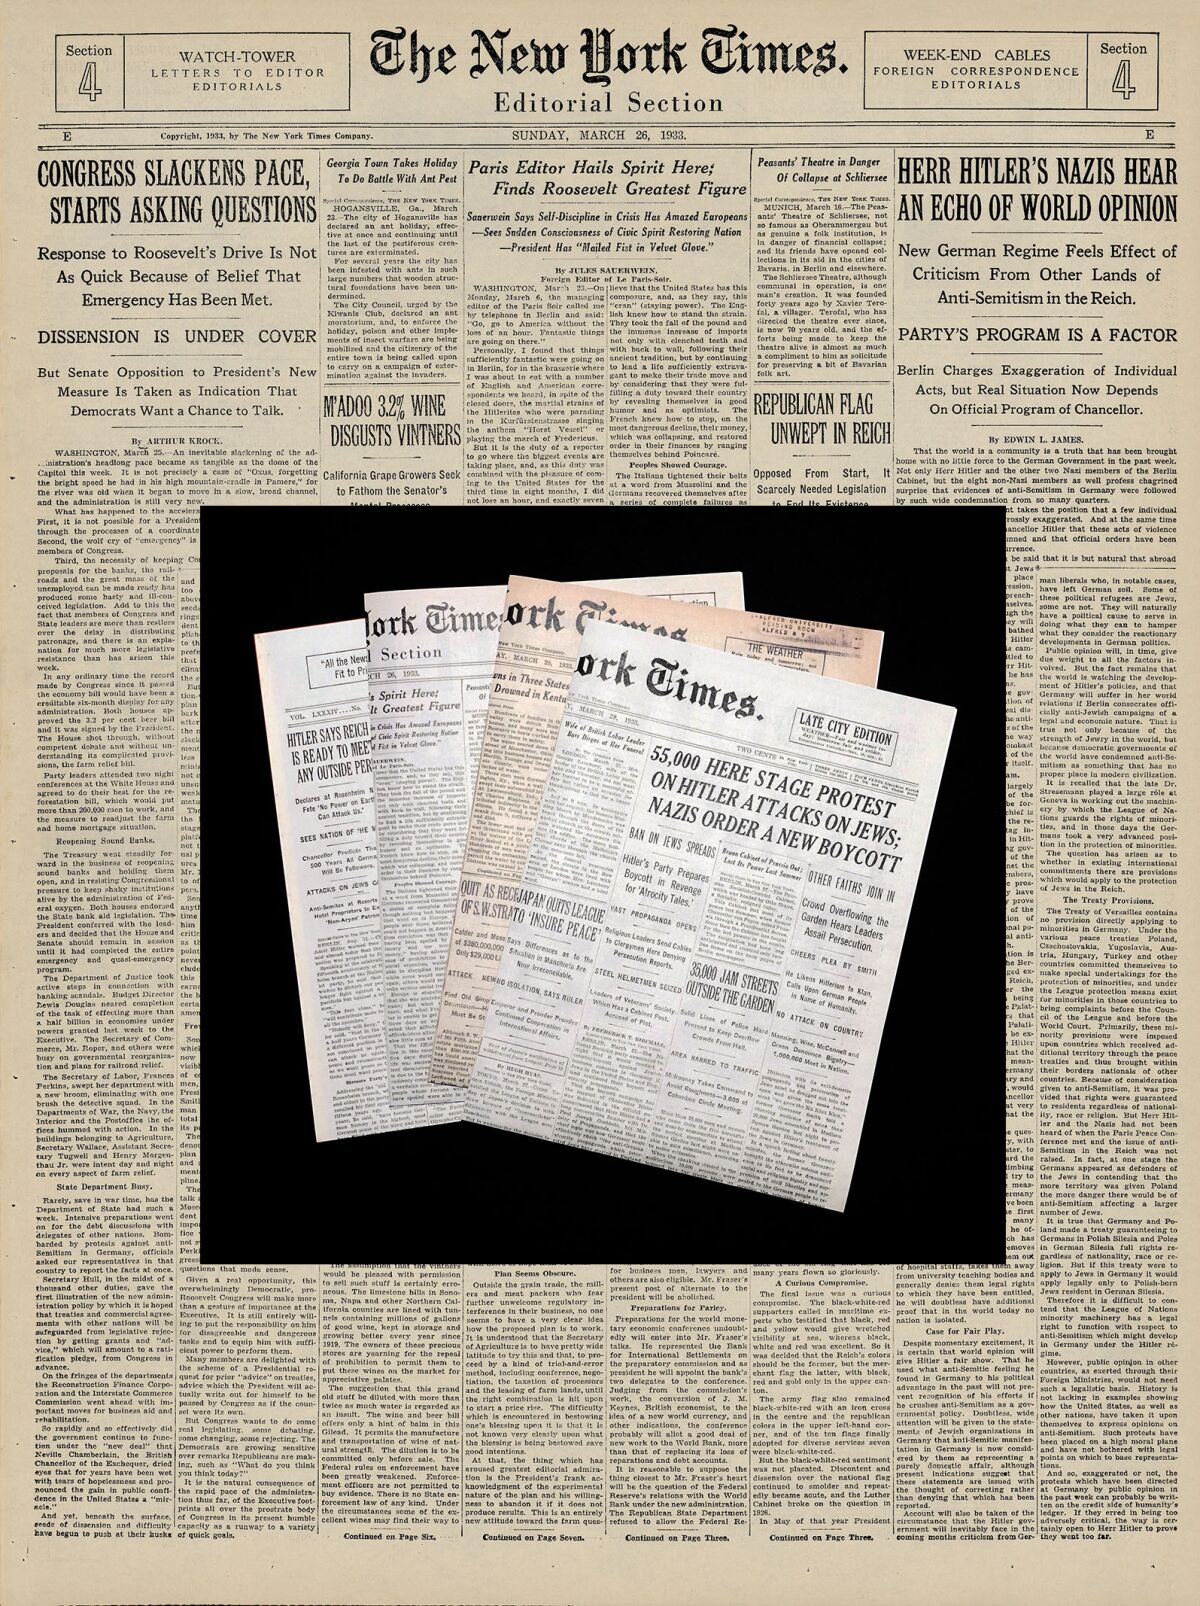 A collaged image shows vintage New York Times covers from the 1930s